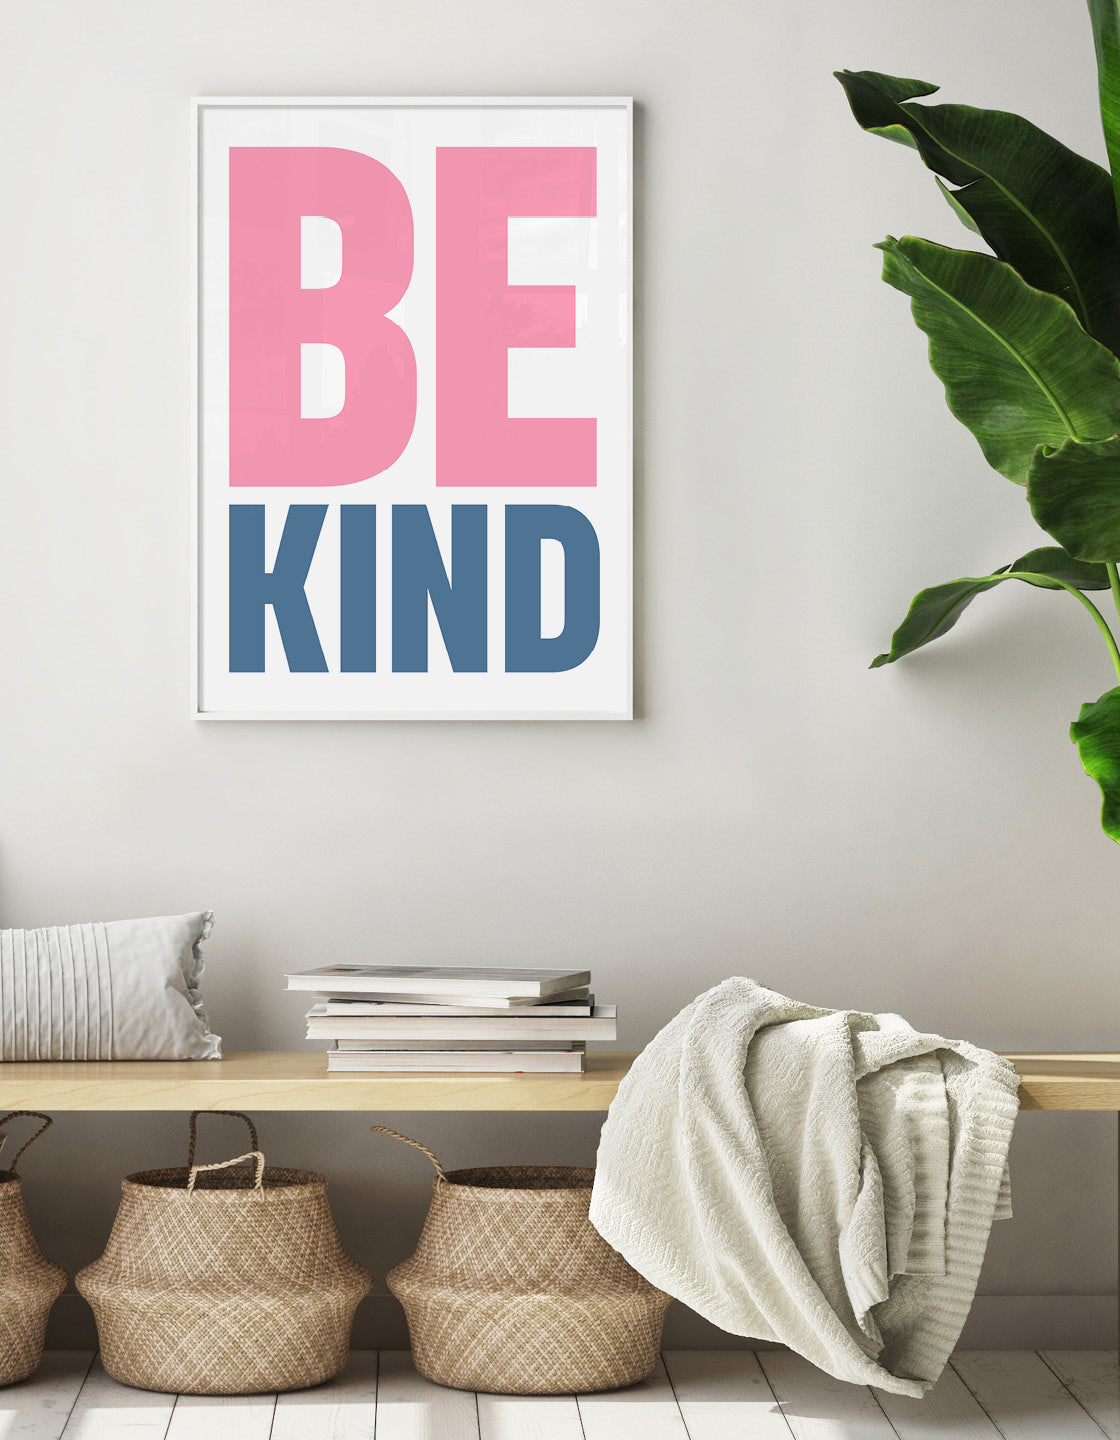 typographic art print with the words Be in pink caps and kind in smaller blue caps against a white background